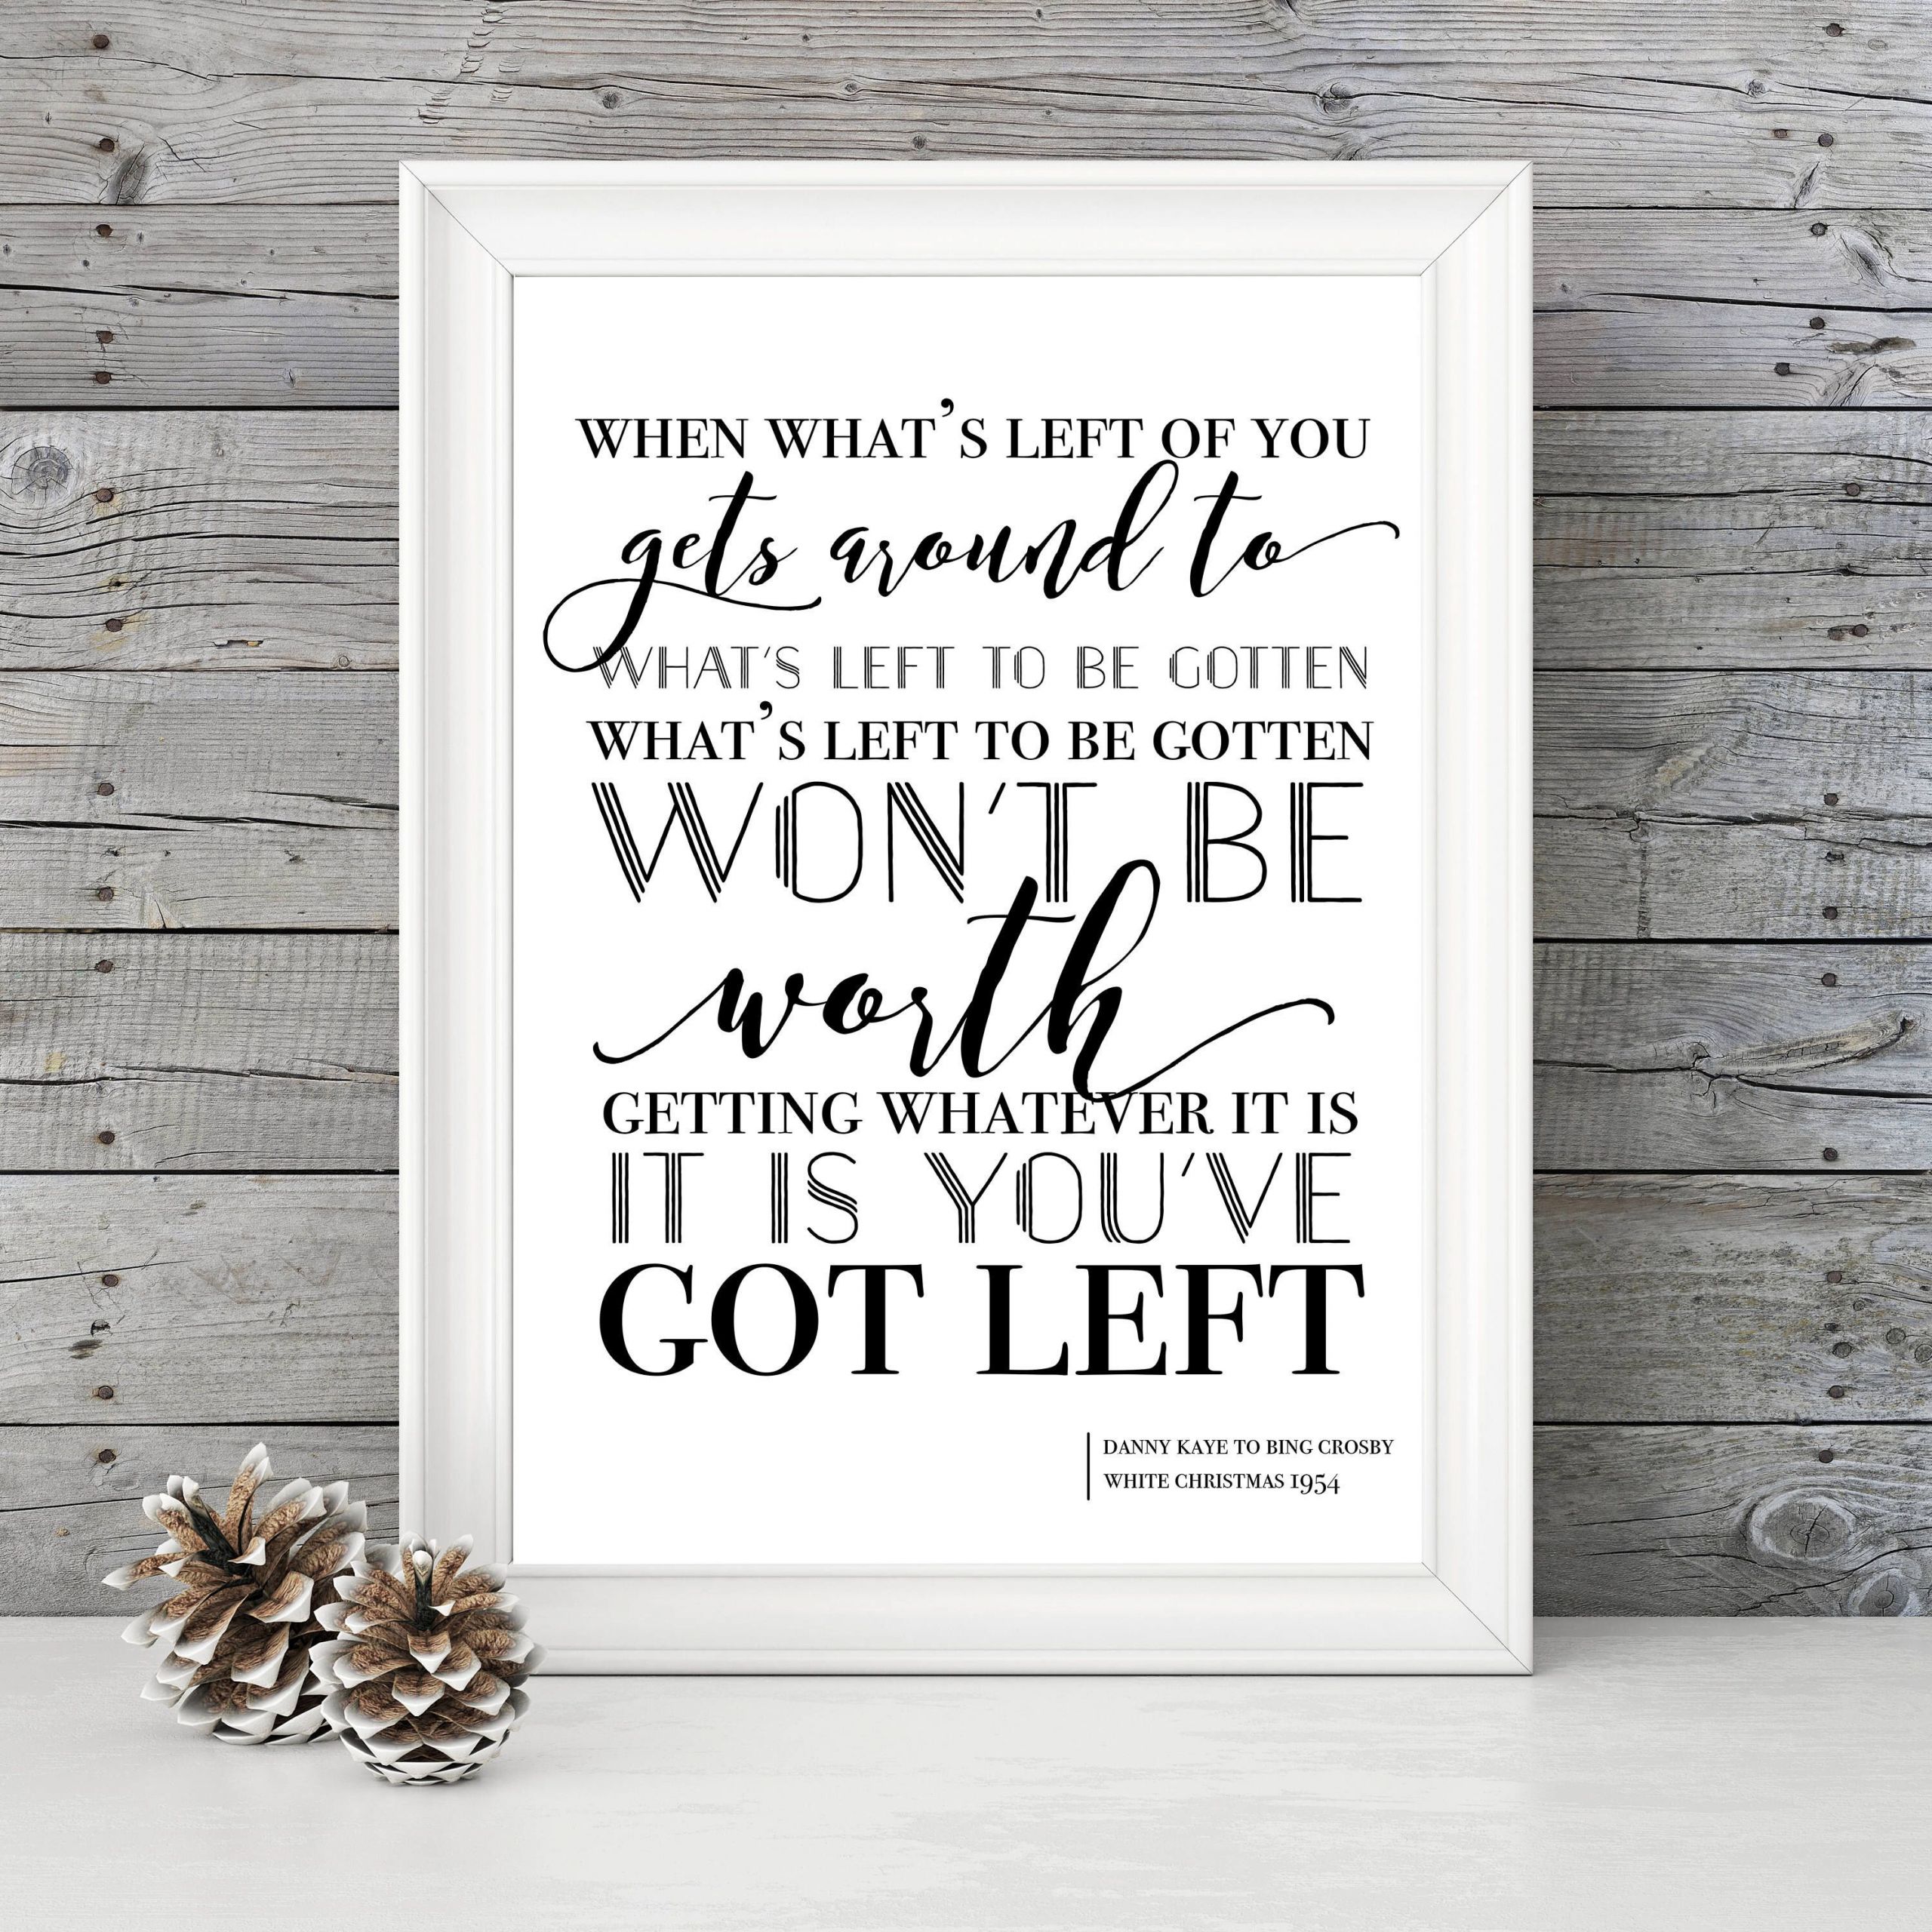 White Christmas Movie Quotes
 White Christmas "When Whatever s Left of You to be Gotten